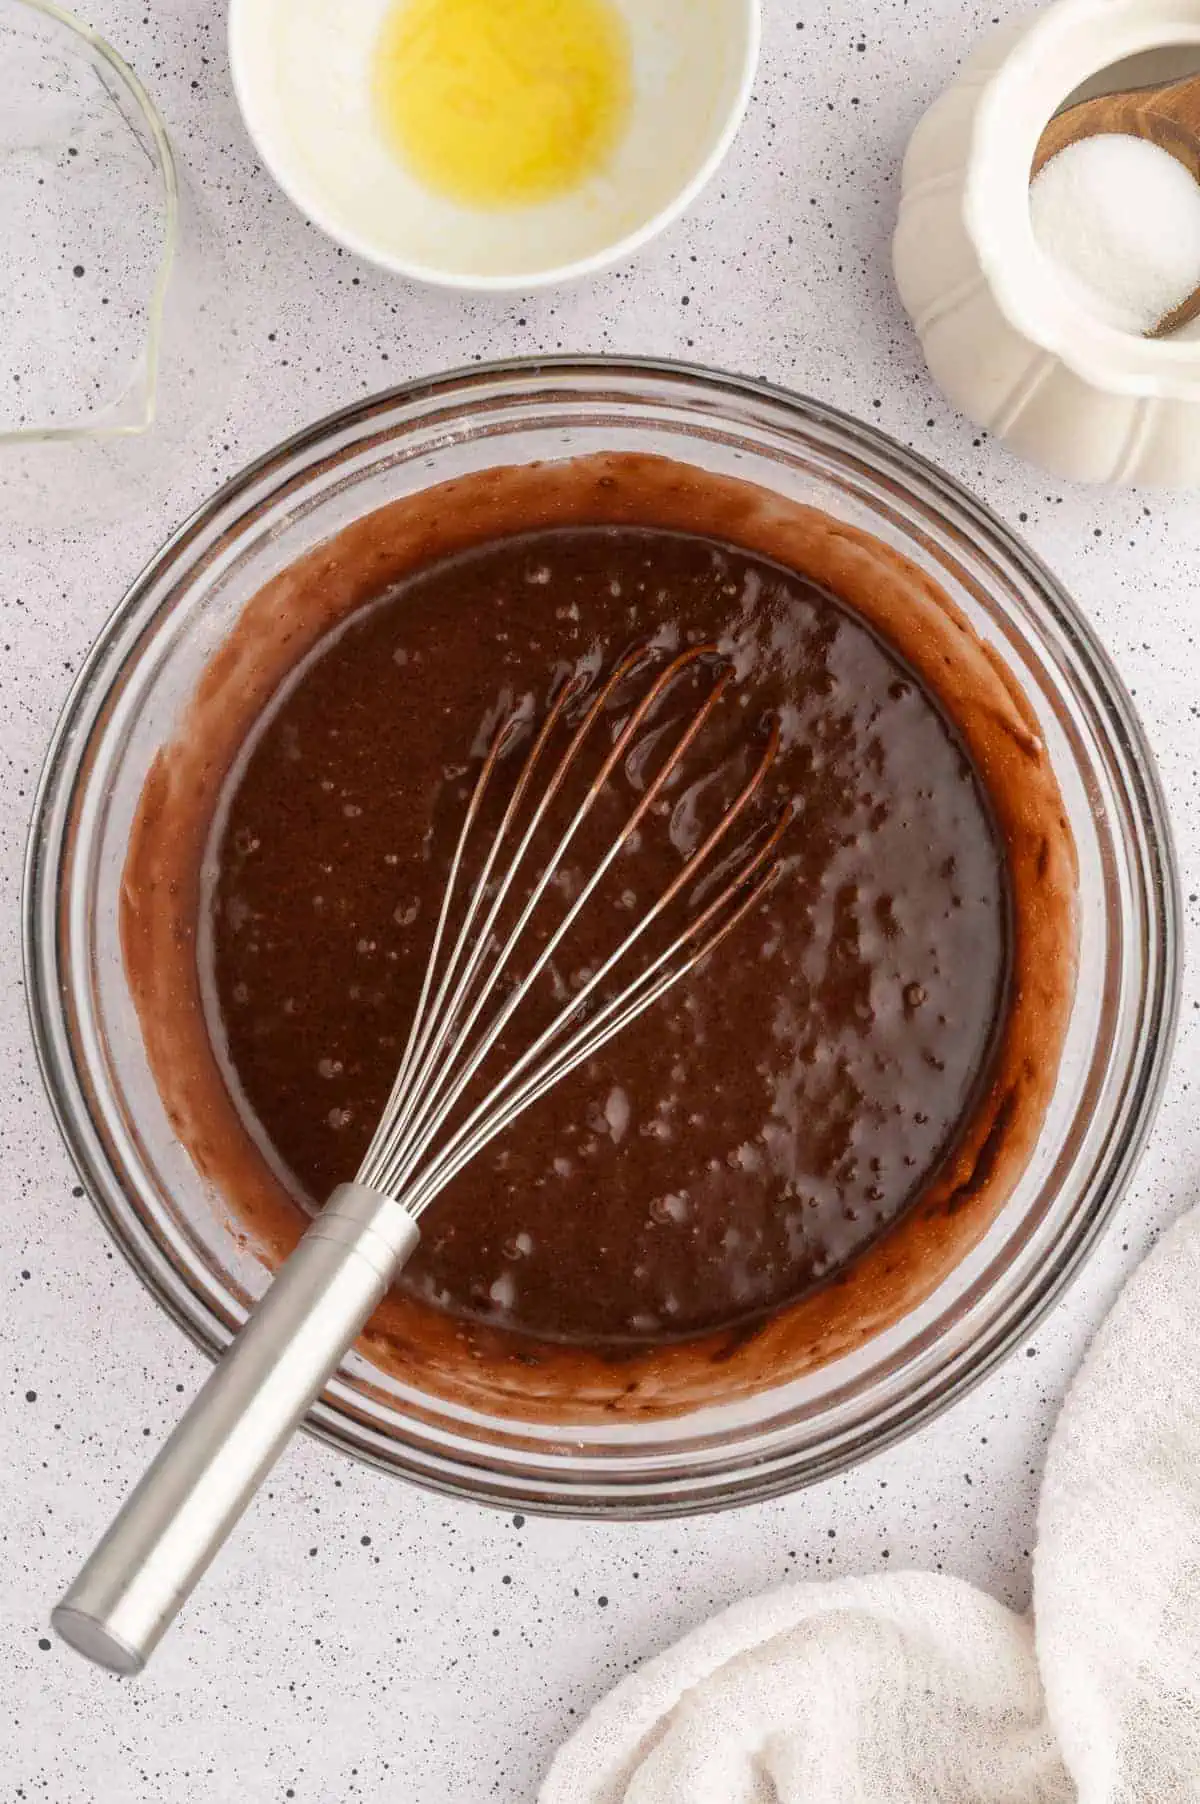 The vegan chocolate cupcake batter all mixed together in a mixing bowl.